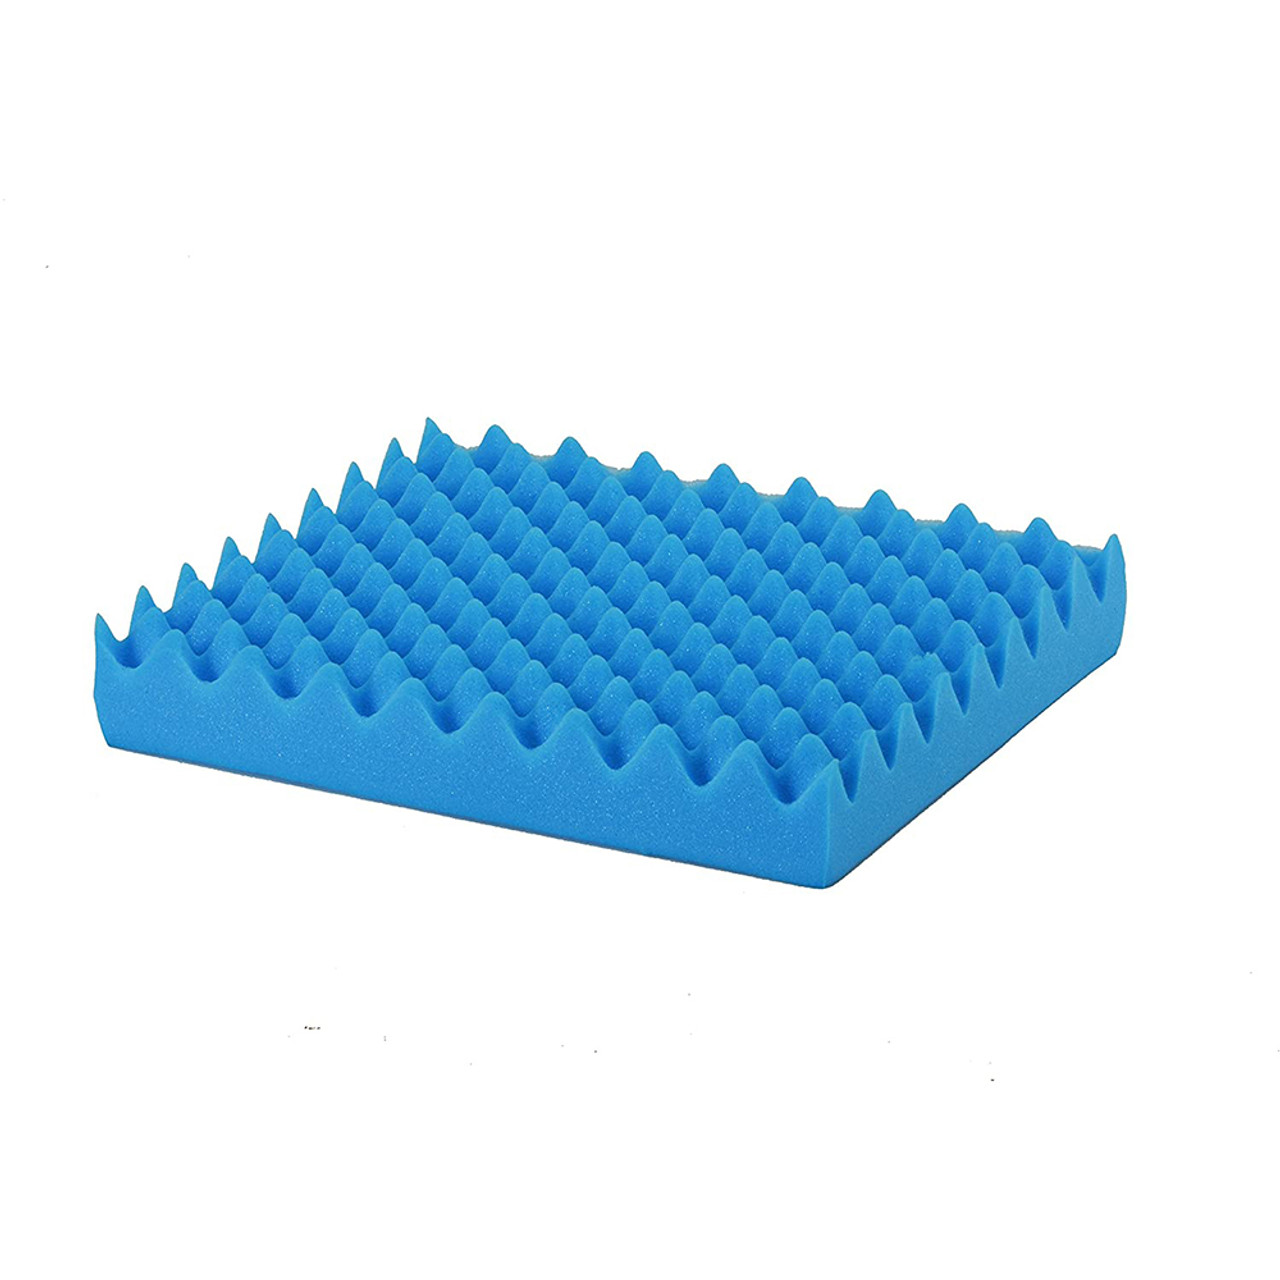 Convoluted Foam Chair Pads - Egg Crate Sculpted Foam Wheel Chair Pads -  Chair Pad - 18 x 32 x 3 W/ Back